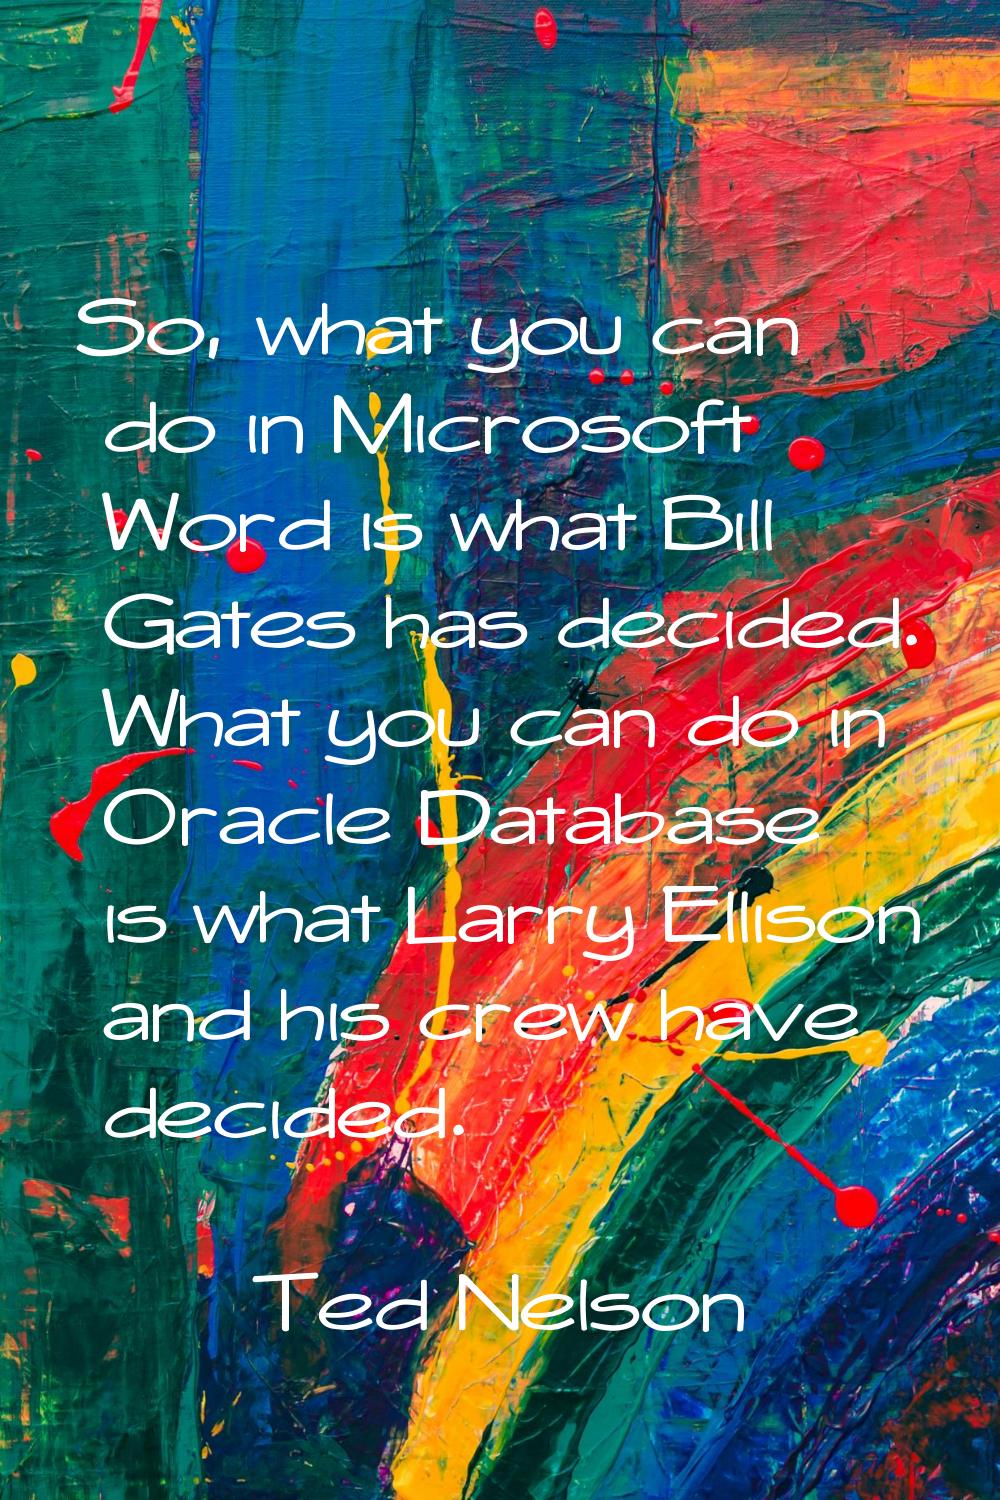 So, what you can do in Microsoft Word is what Bill Gates has decided. What you can do in Oracle Dat